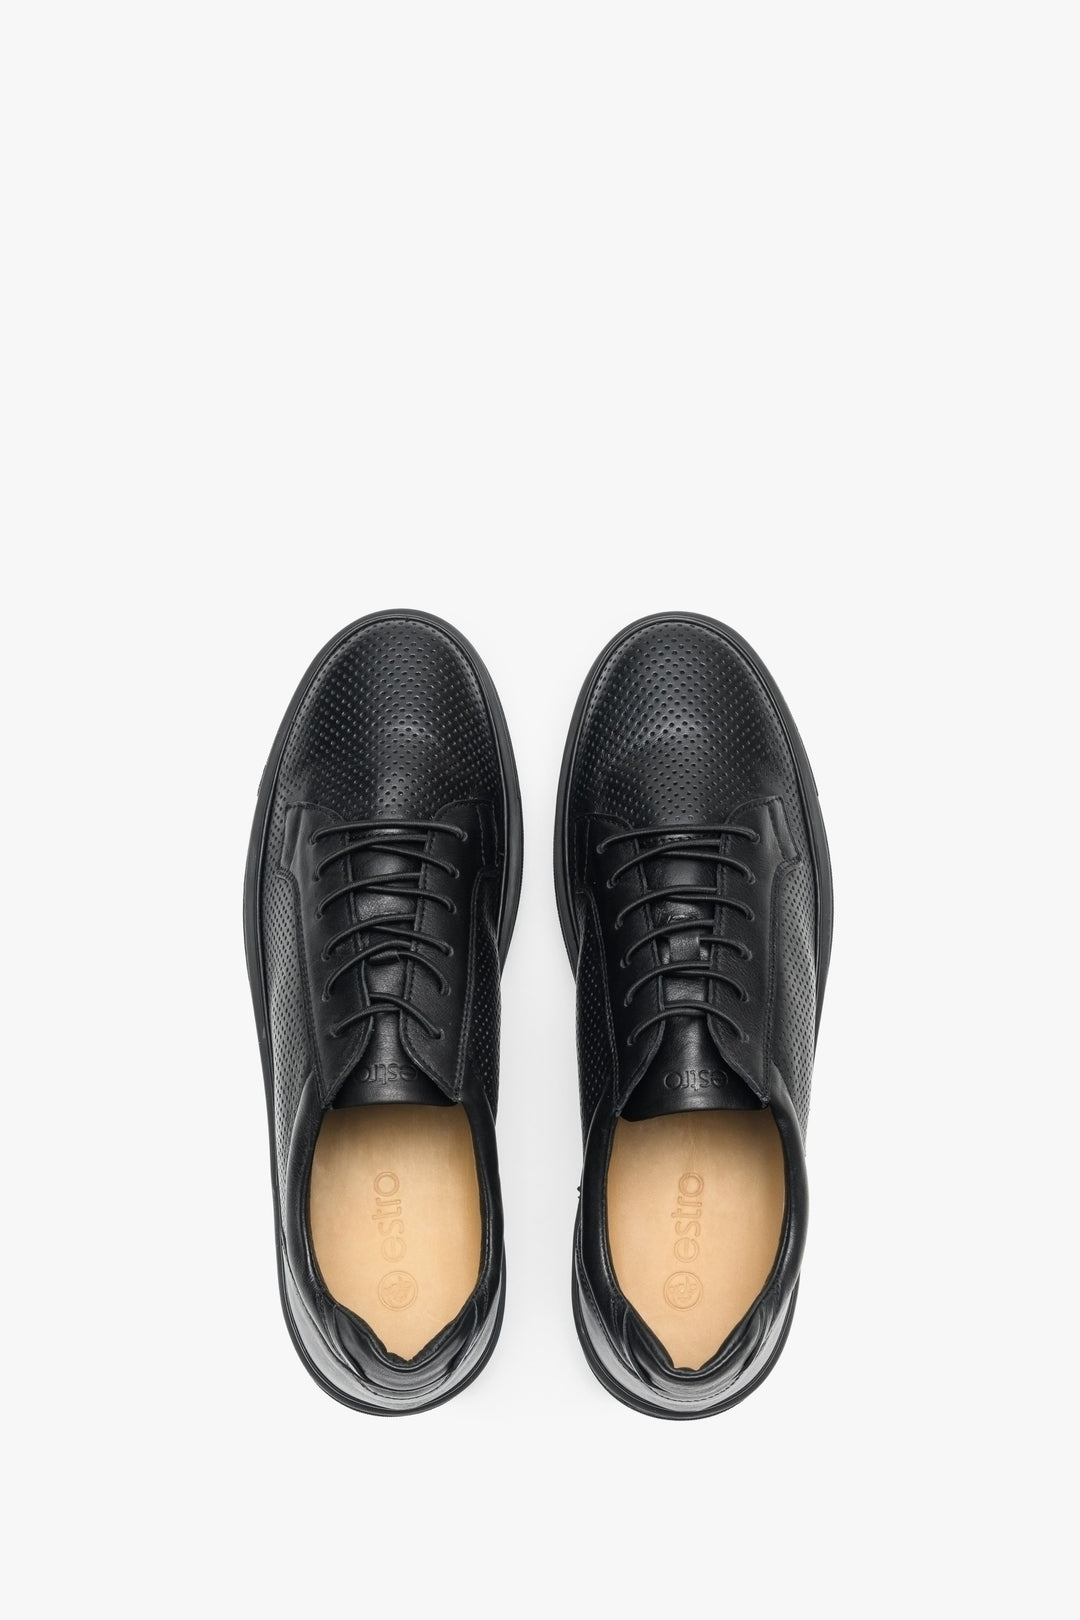 Men's leather sneakers for summer in black with perforation - presentation of shoes from above.